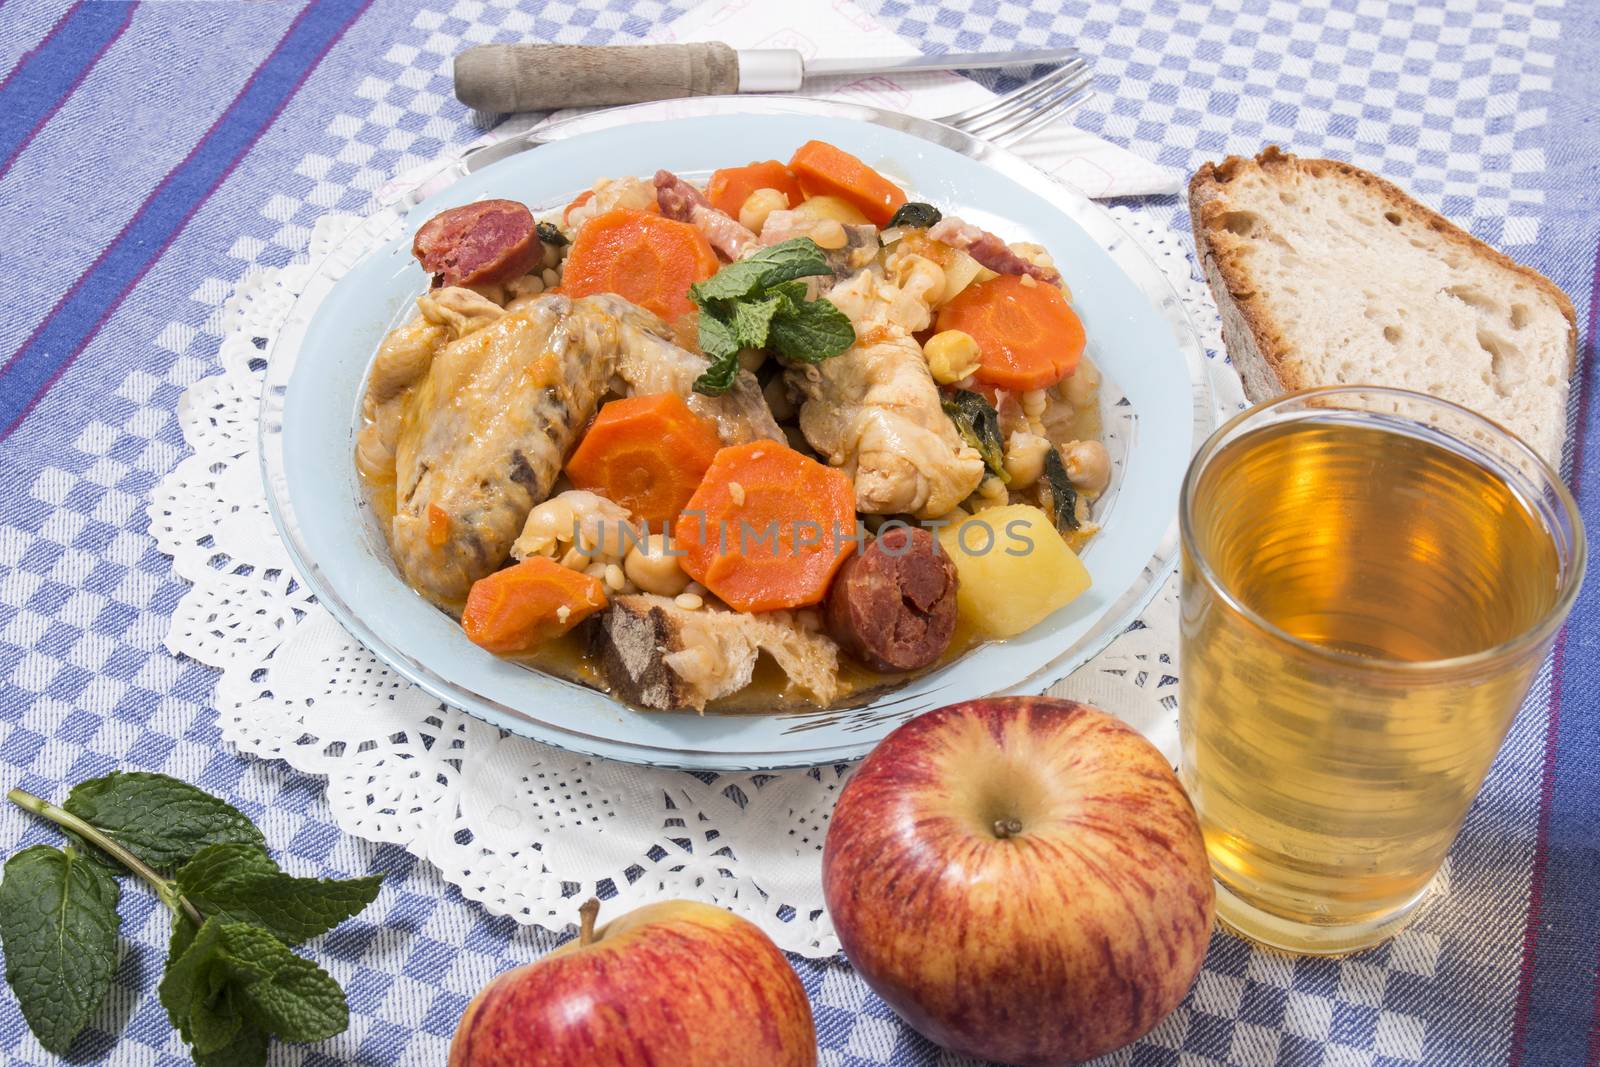 Traditional portuguese meal of Chickpeas with chicken, carrot and chorizo.